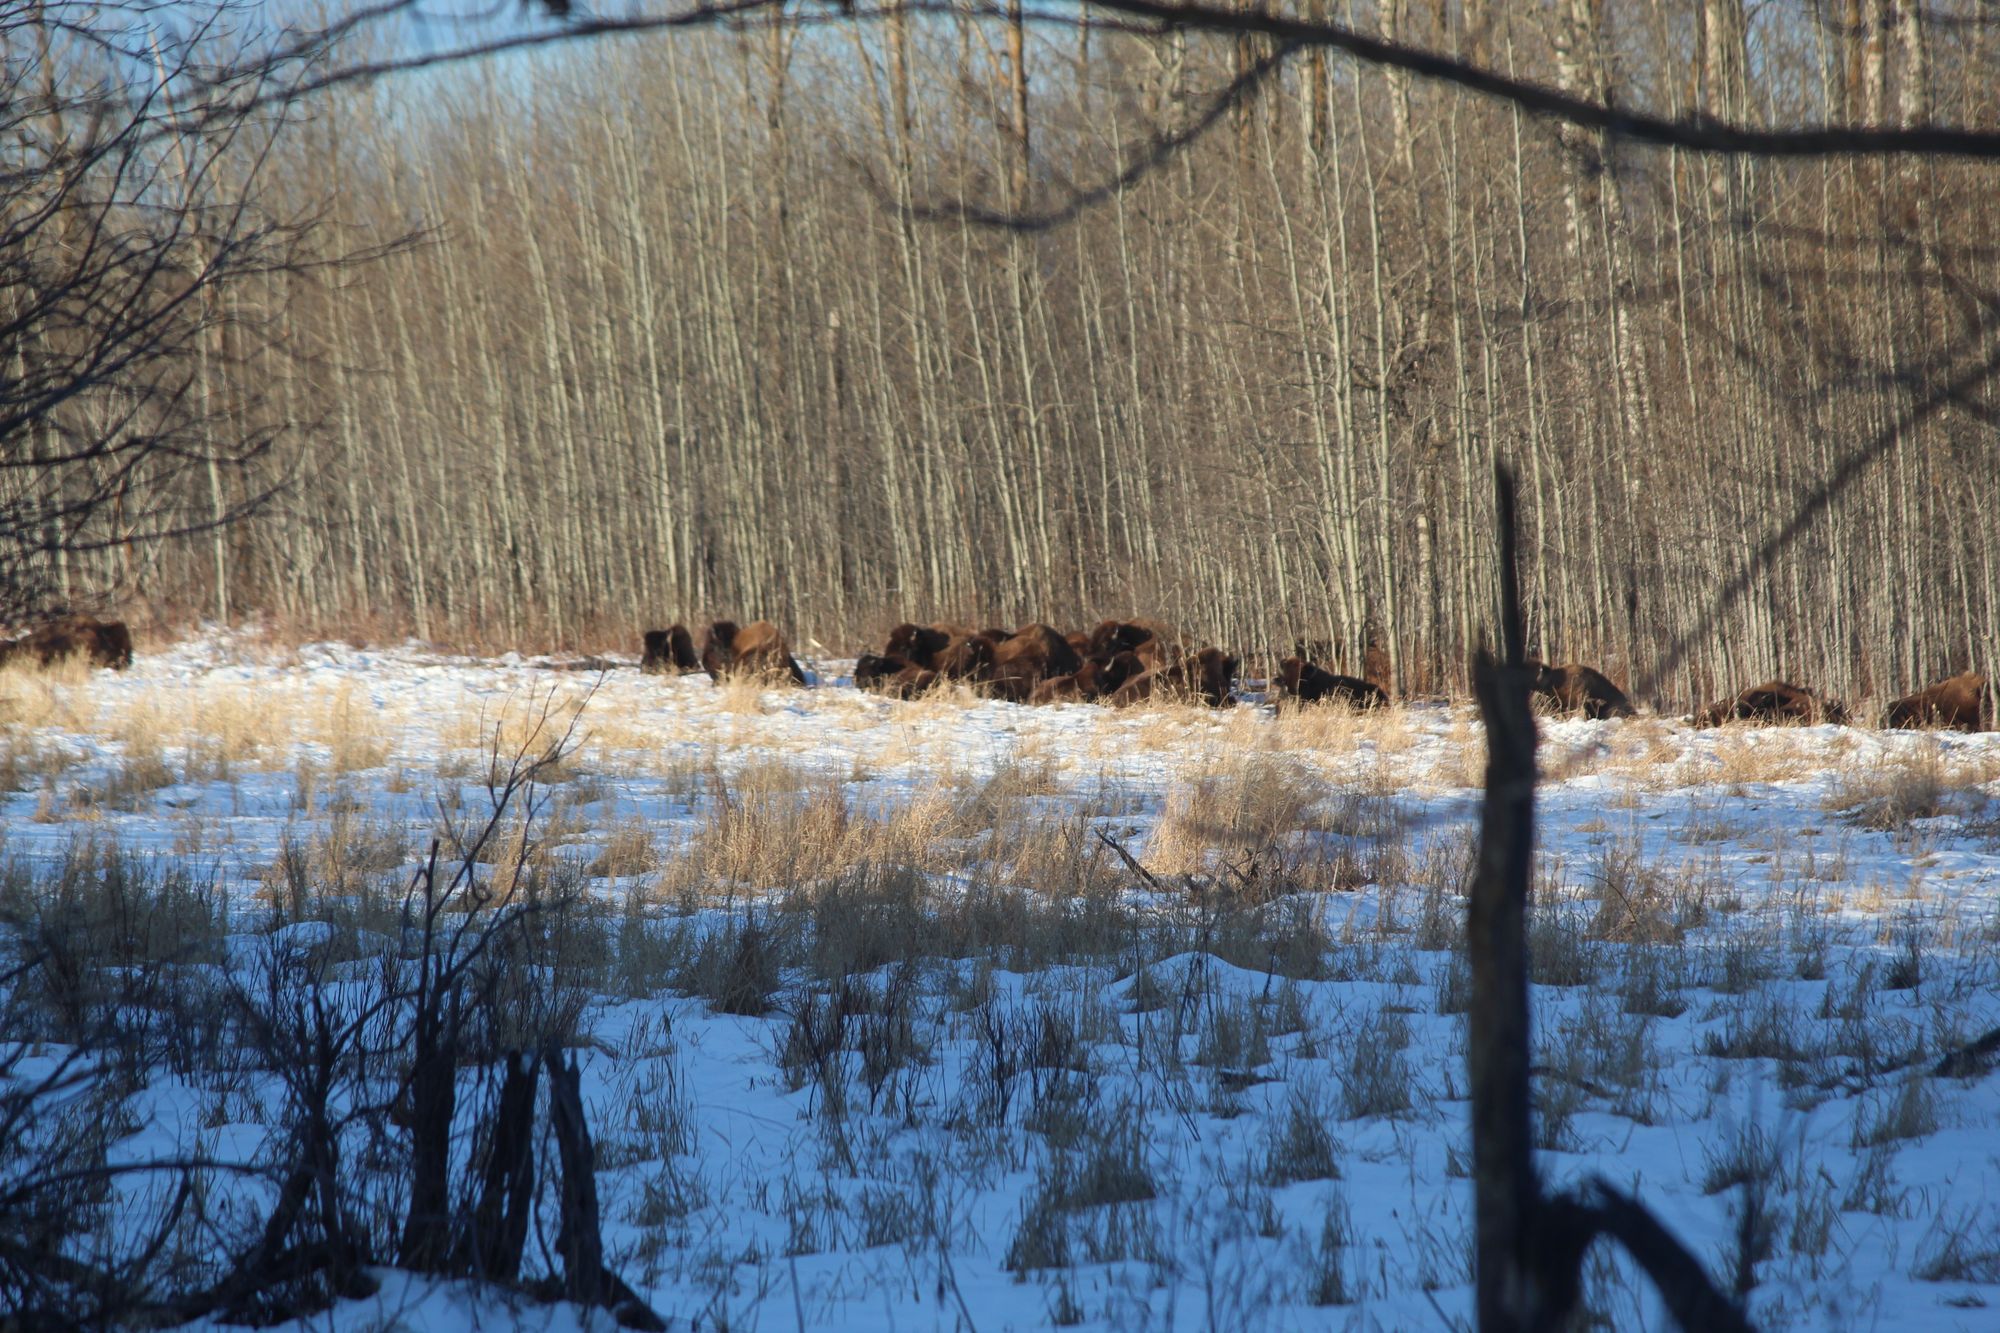 New publication: winter's influence on wood bison